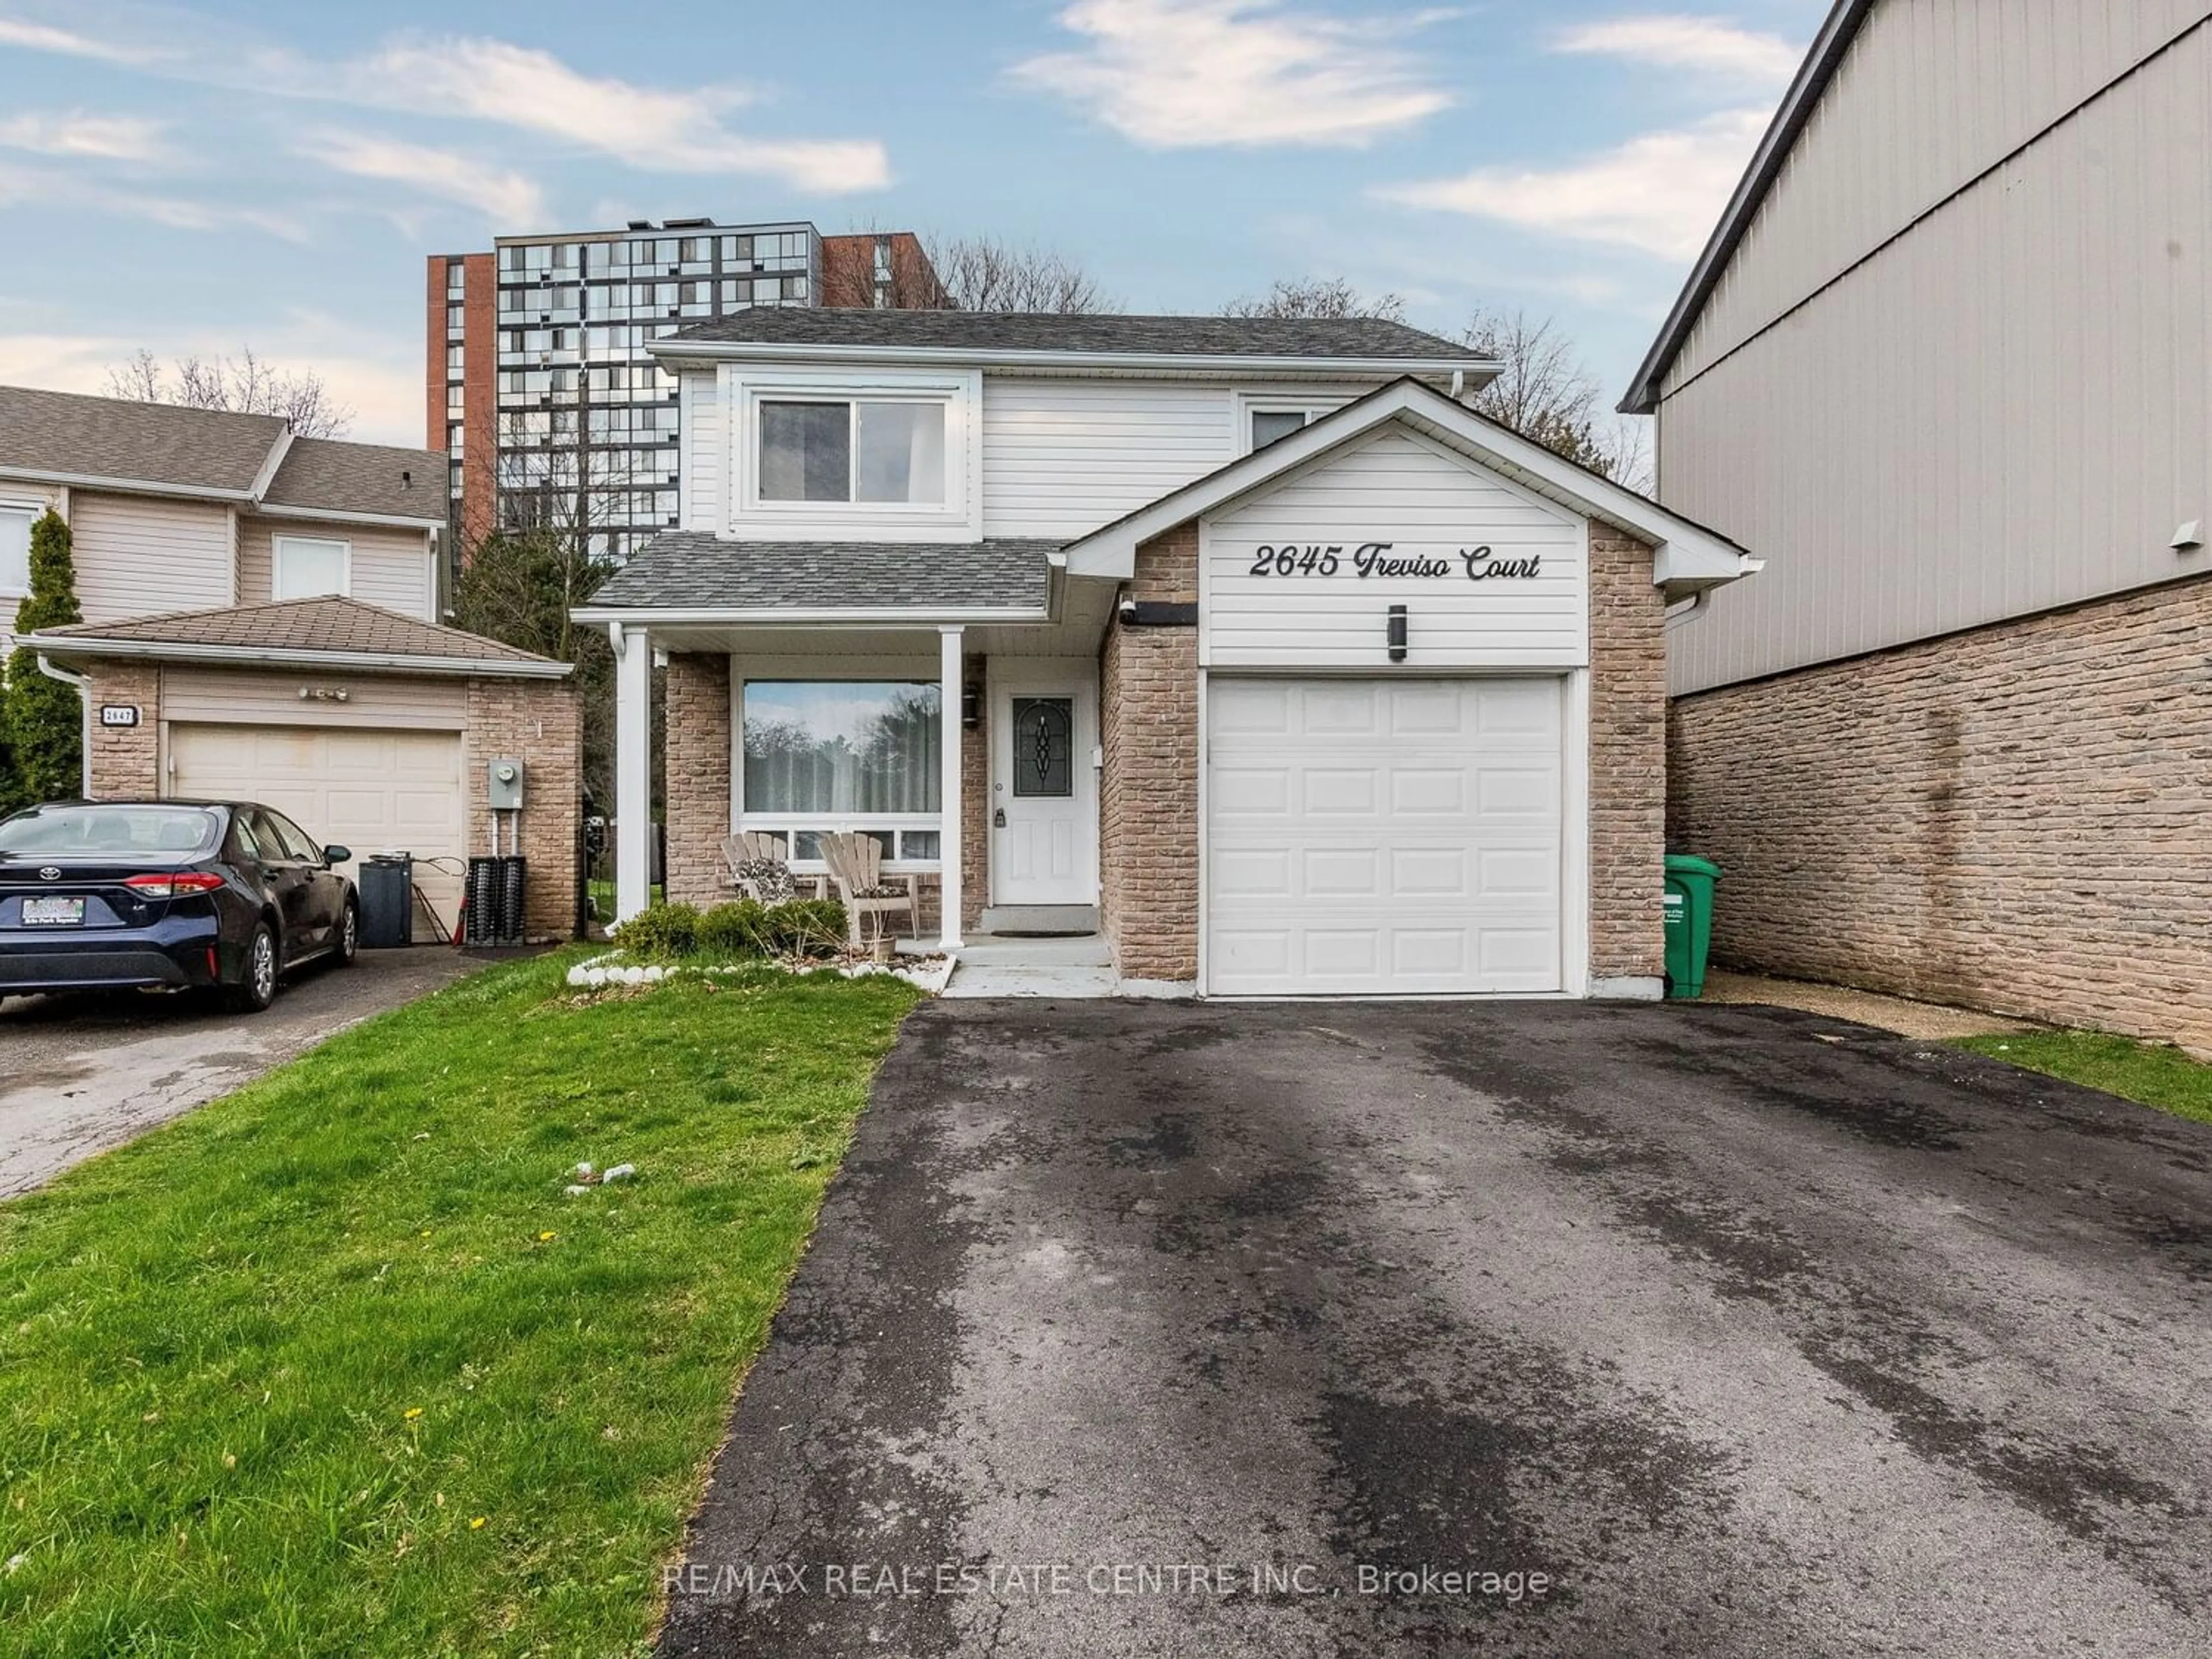 A pic from exterior of the house or condo for 2645 Treviso Crt, Mississauga Ontario L5N 2T3